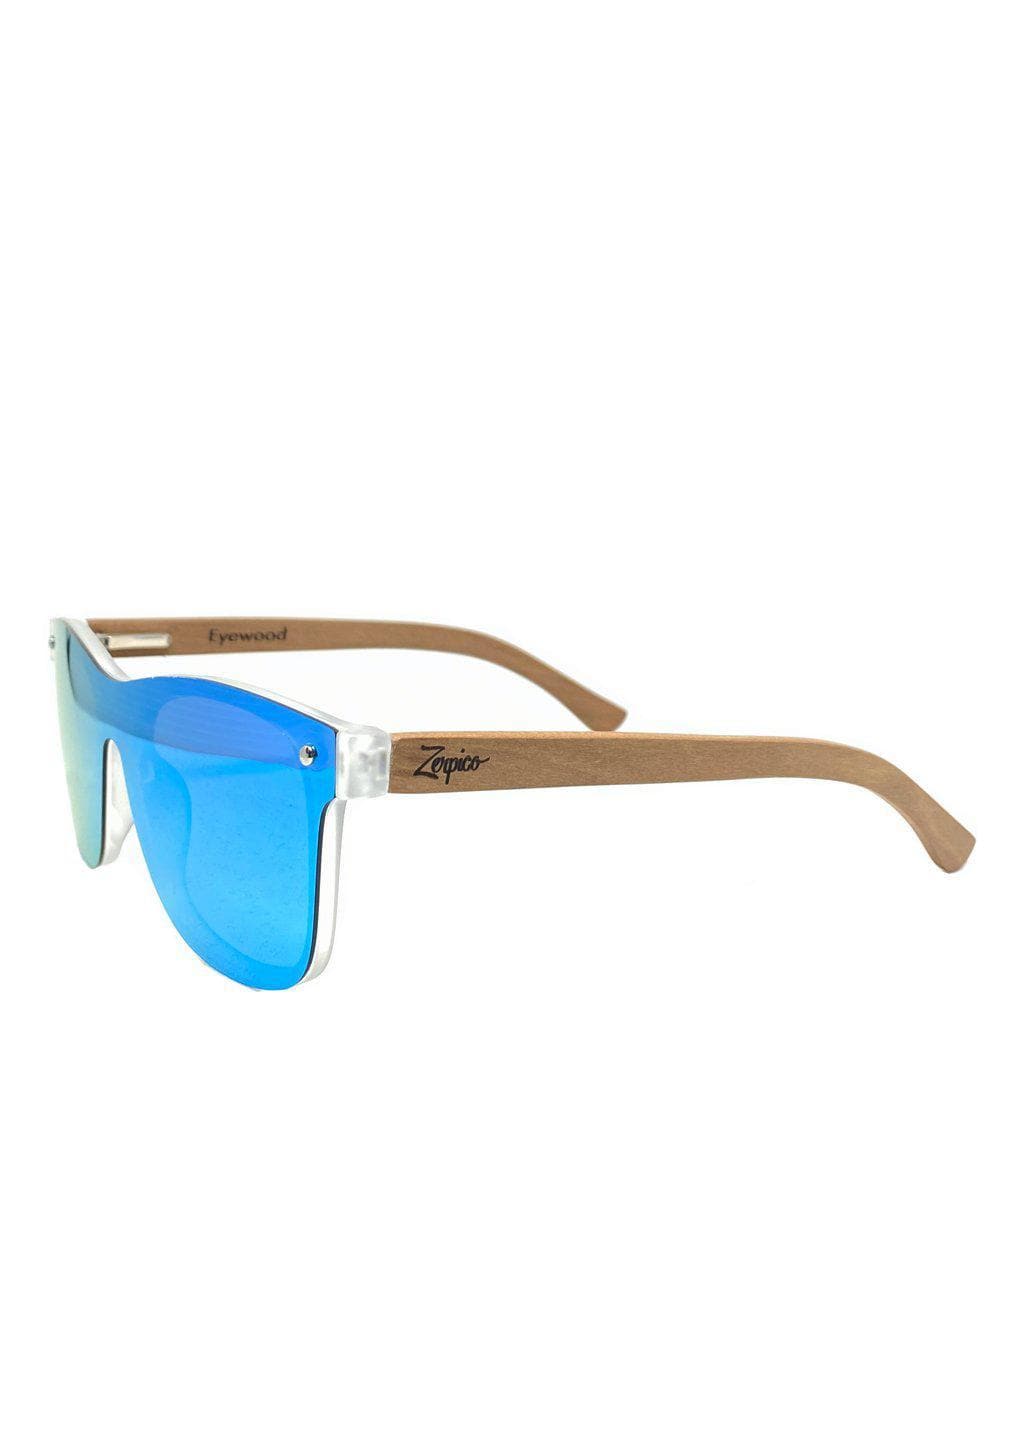 Eyewood tomorrow is our modern cool take on classic models. This is Gemeni with blue mirror lenses. Nice wooden sunglasses. From the side.